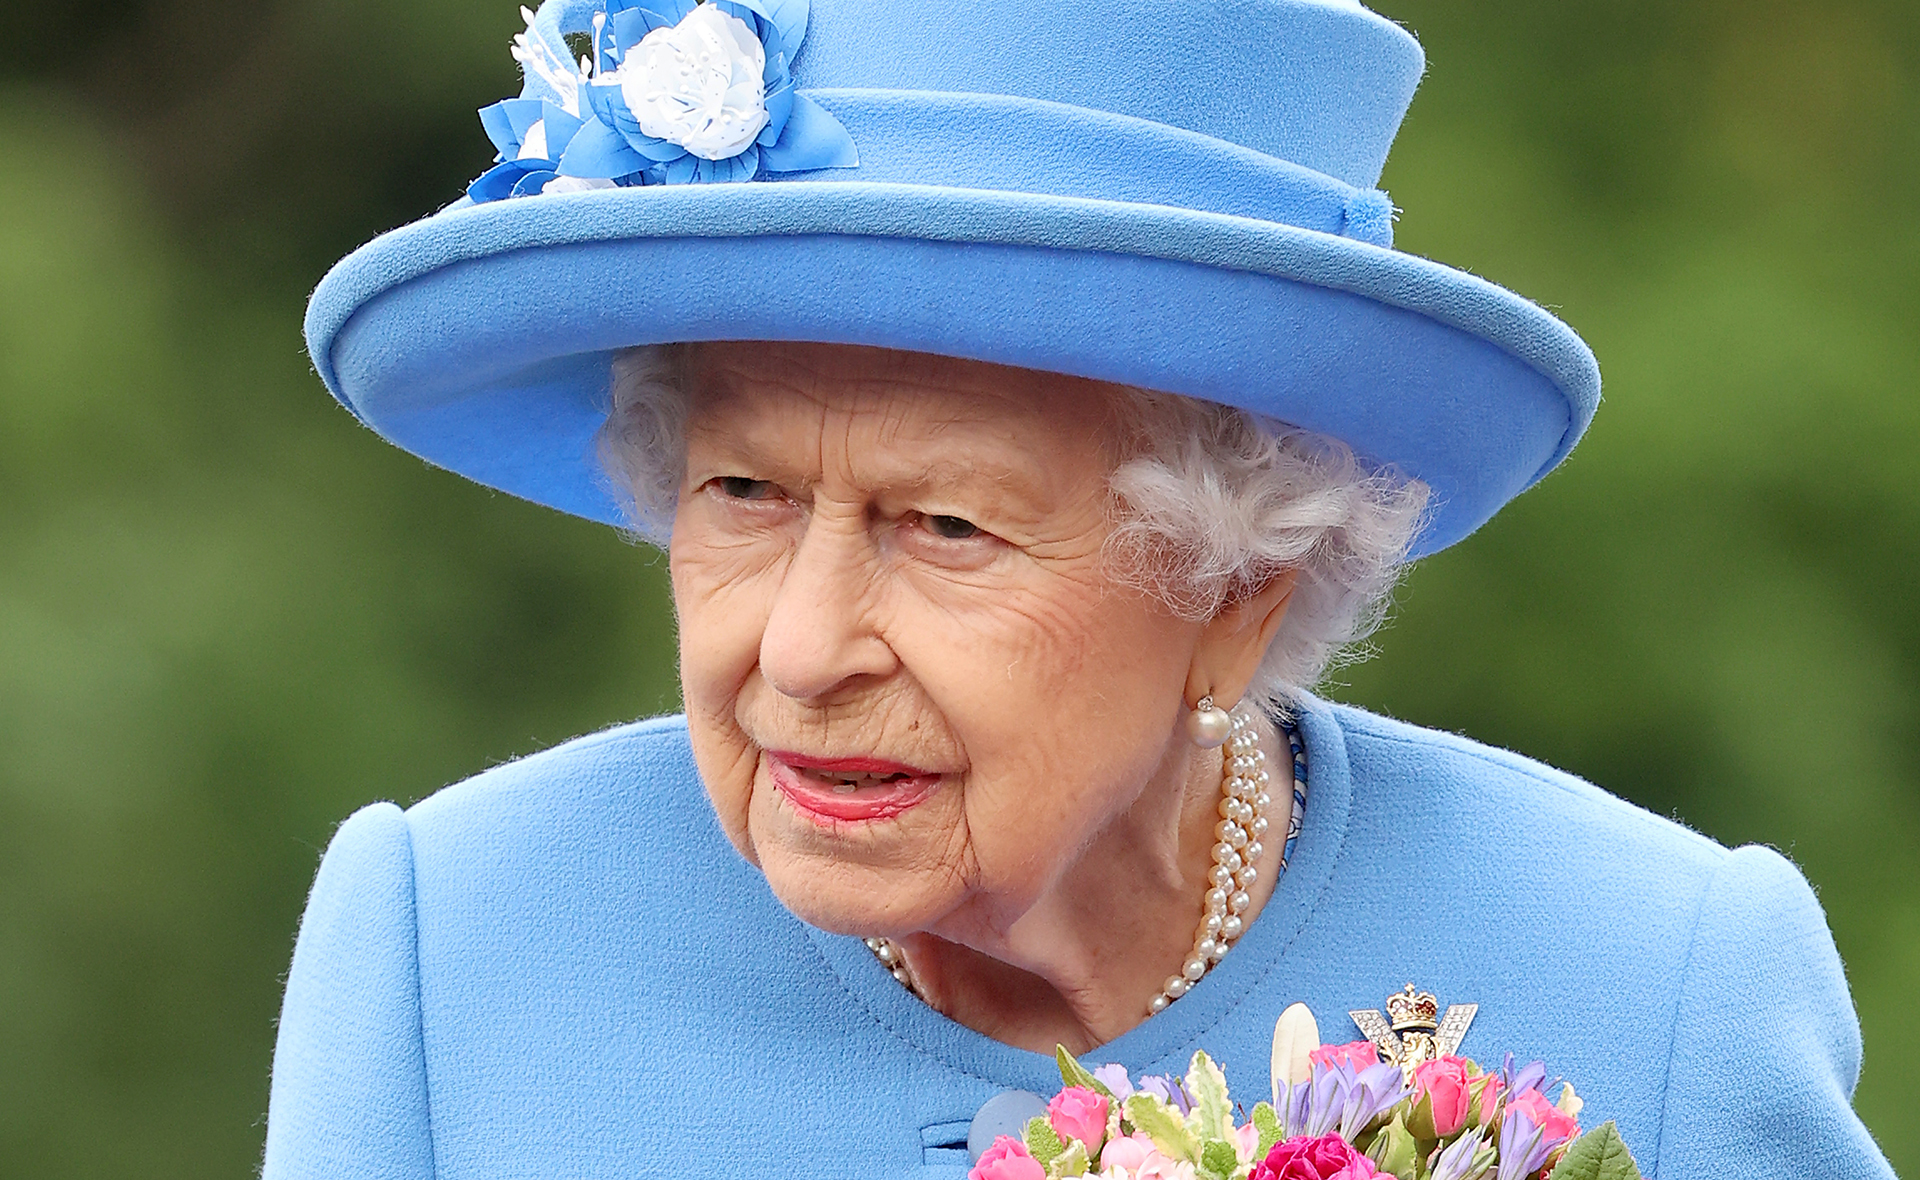 Palace confirms the Queen spent a night in hospital after news she cancelled a royal trip over medical concerns